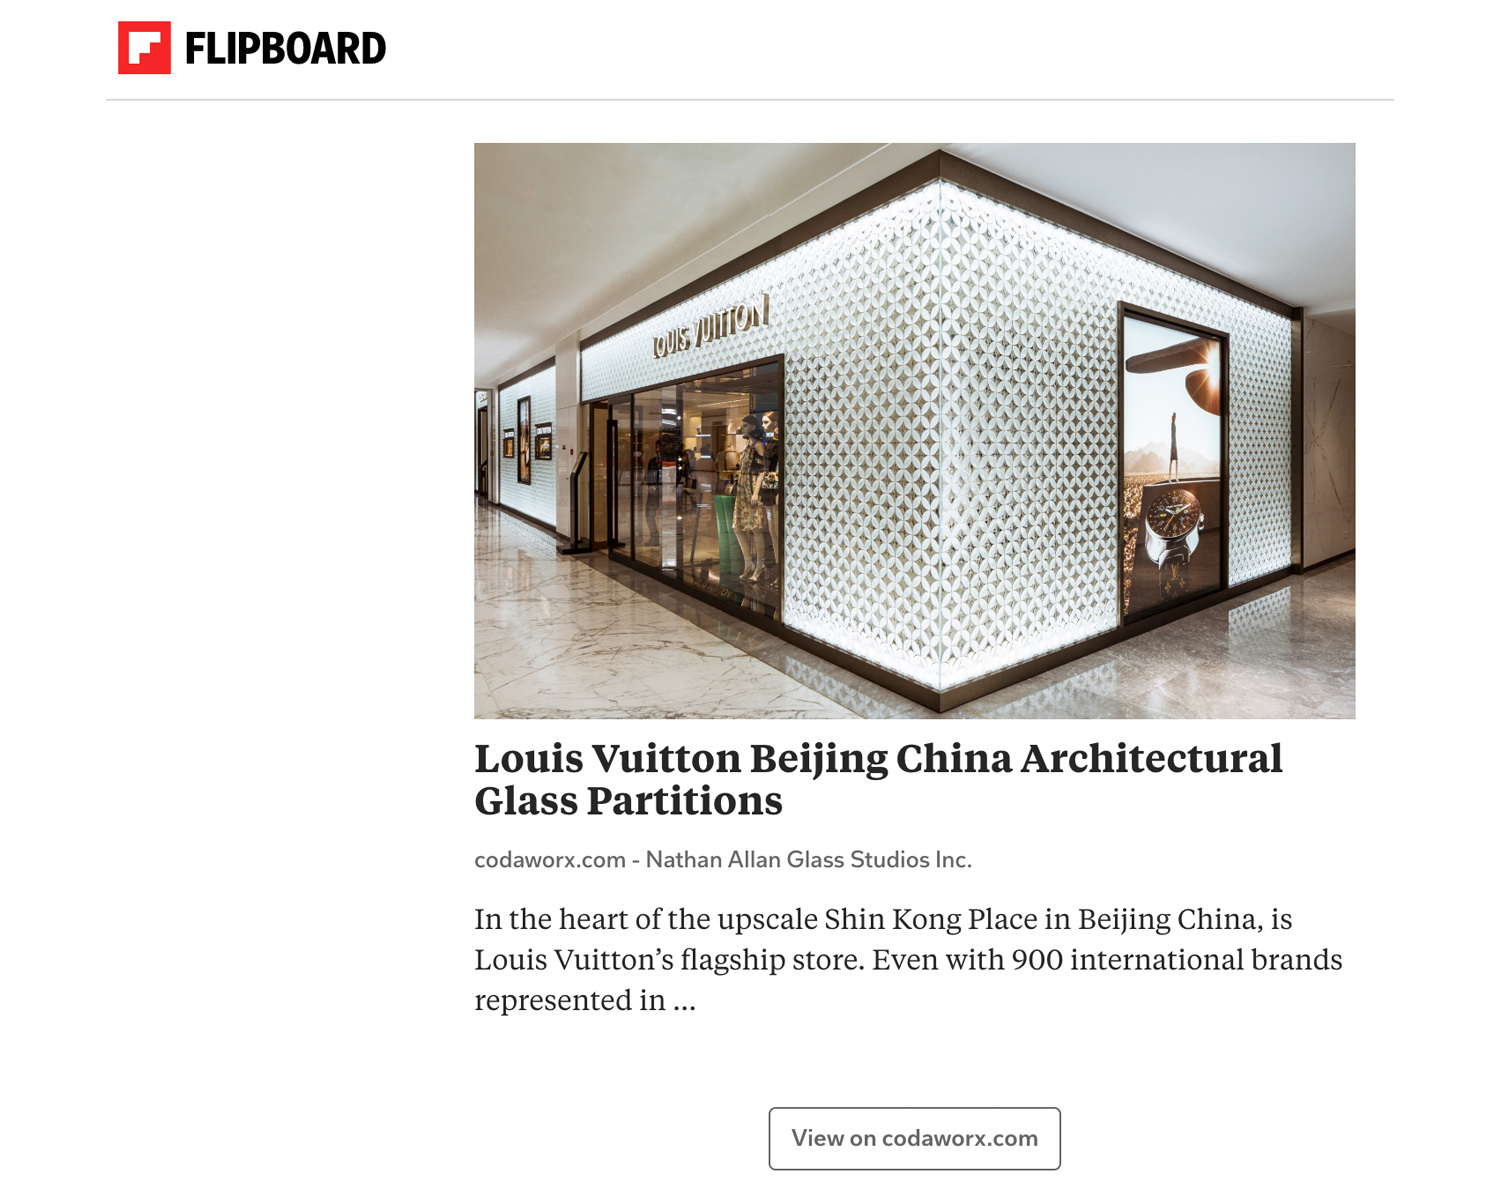 Louis Vuitton Beijing China Architectural Glass Partitions by Nathan